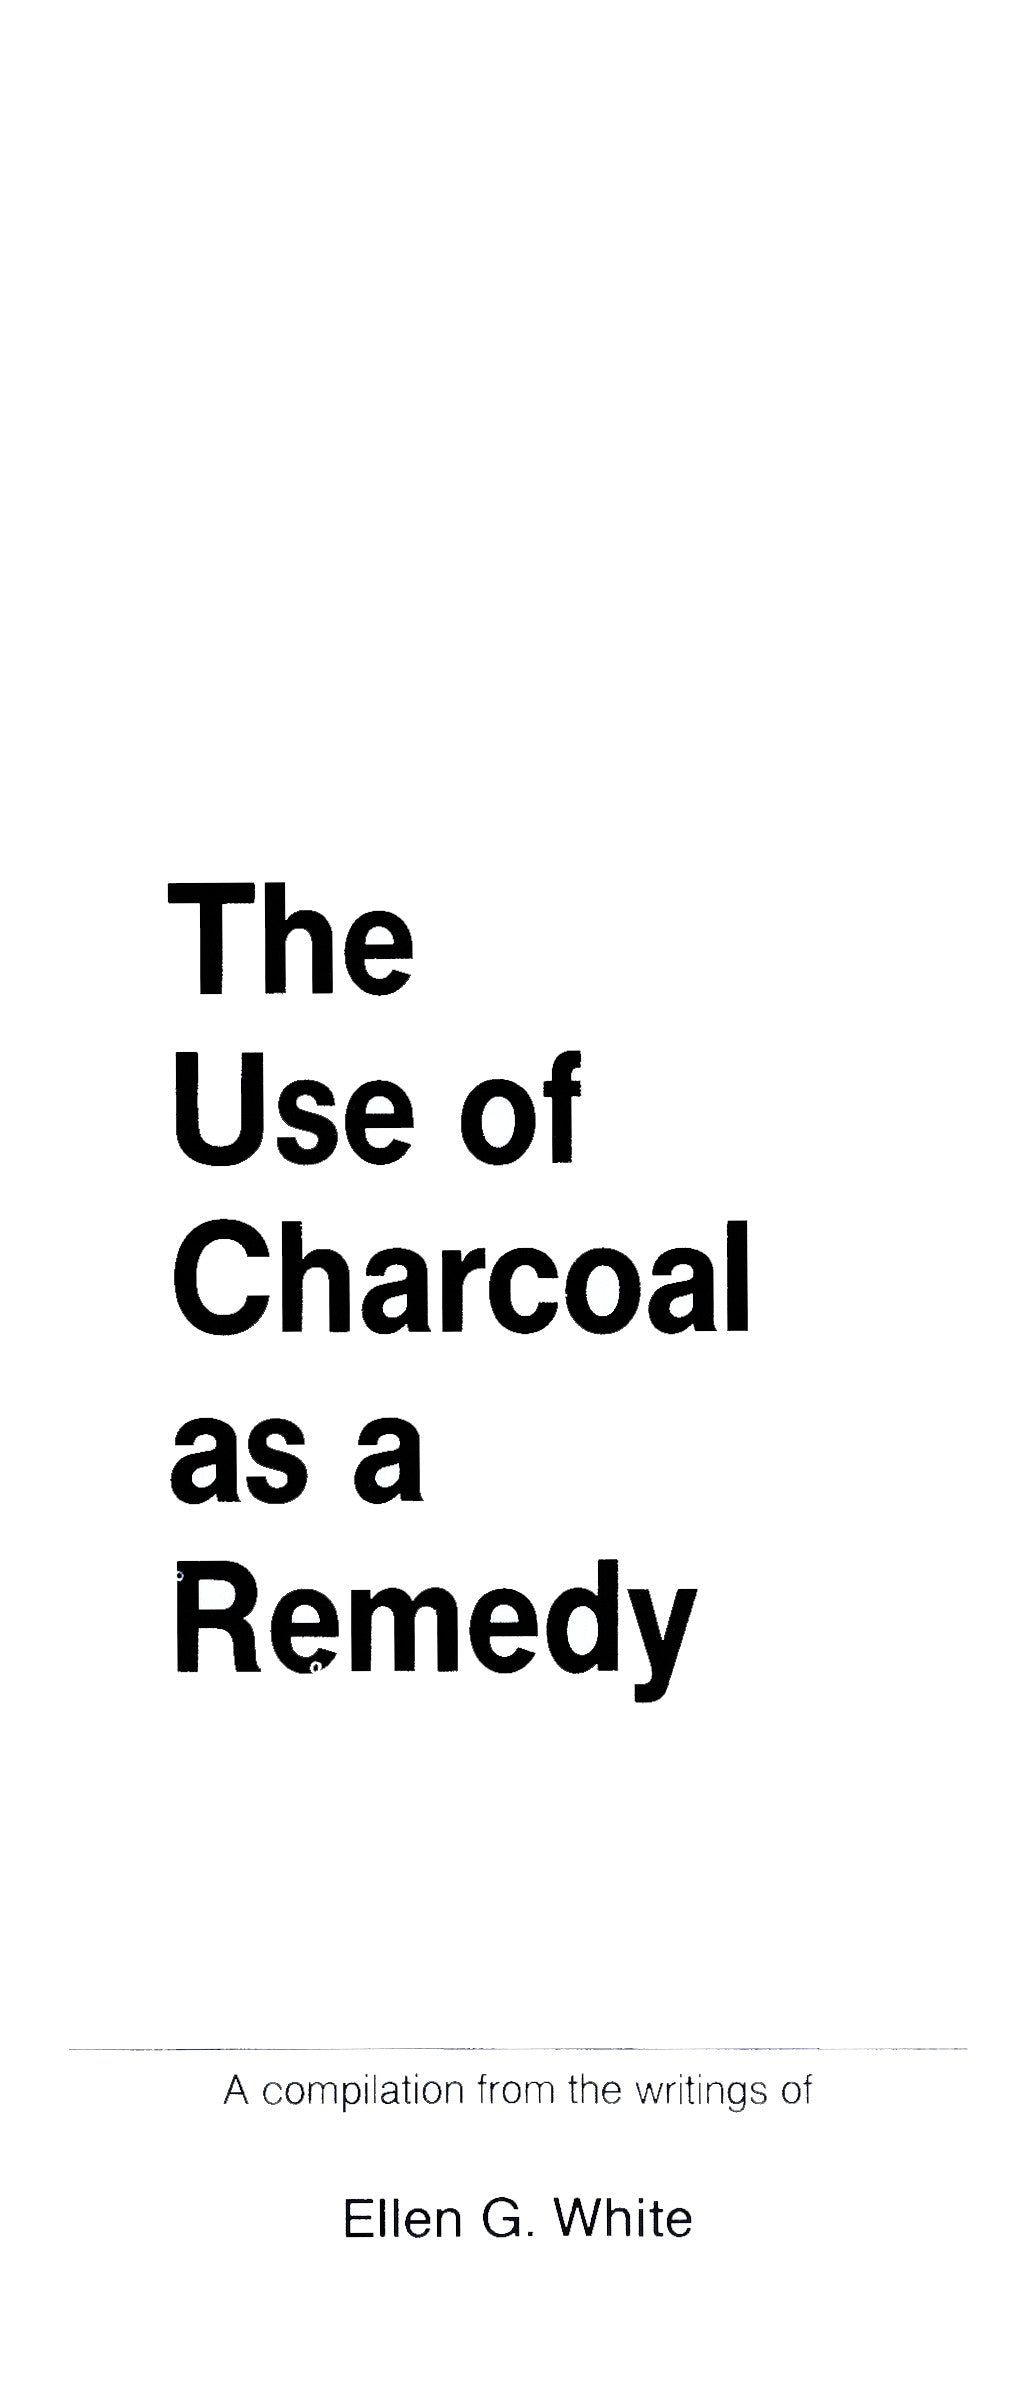 The Use of Charcoal as a Remedy